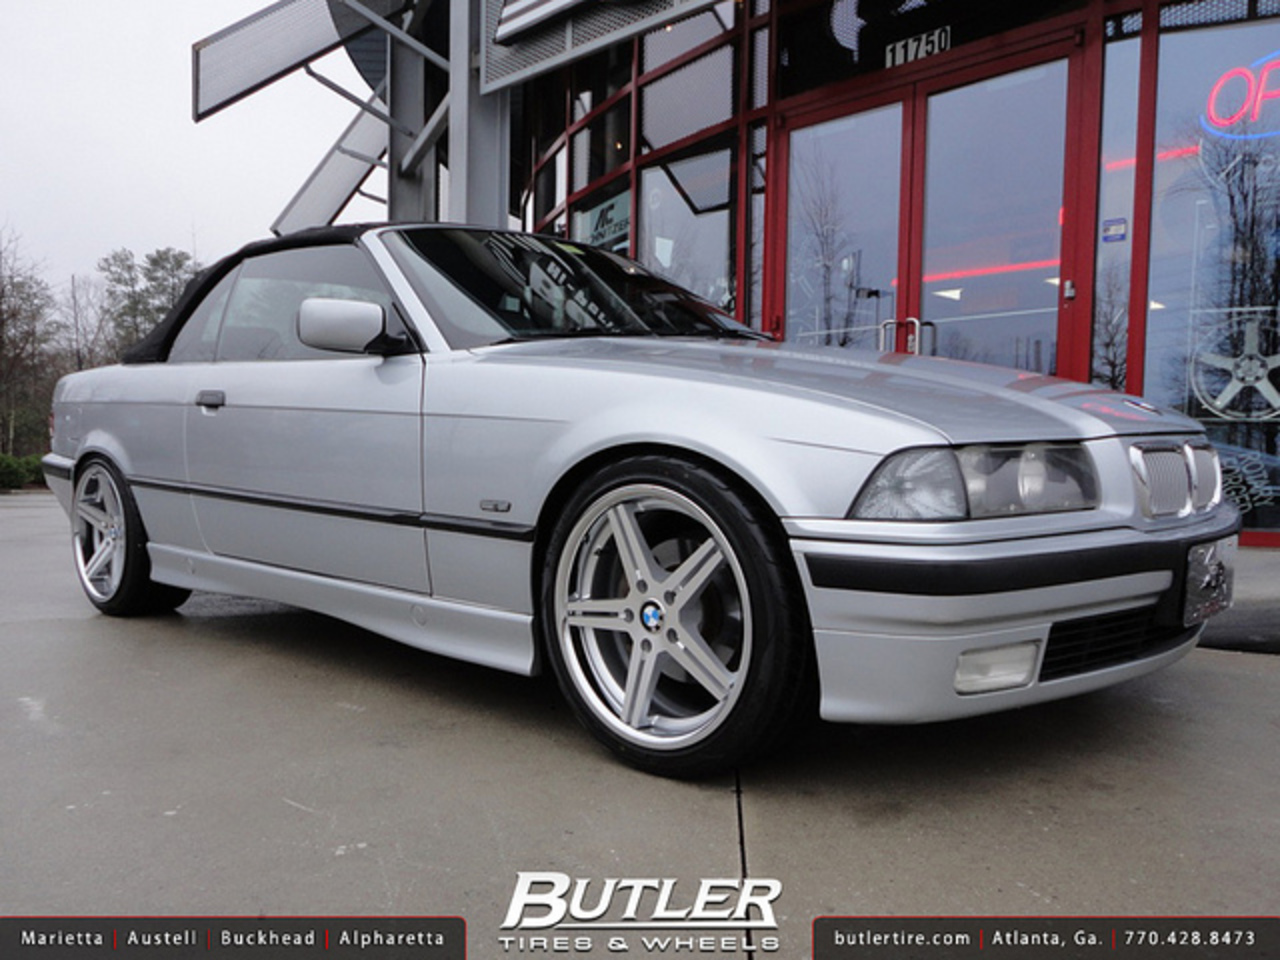 BMW 328Ci with 18in TSW Mirabeau Wheels | Flickr - Photo Sharing!